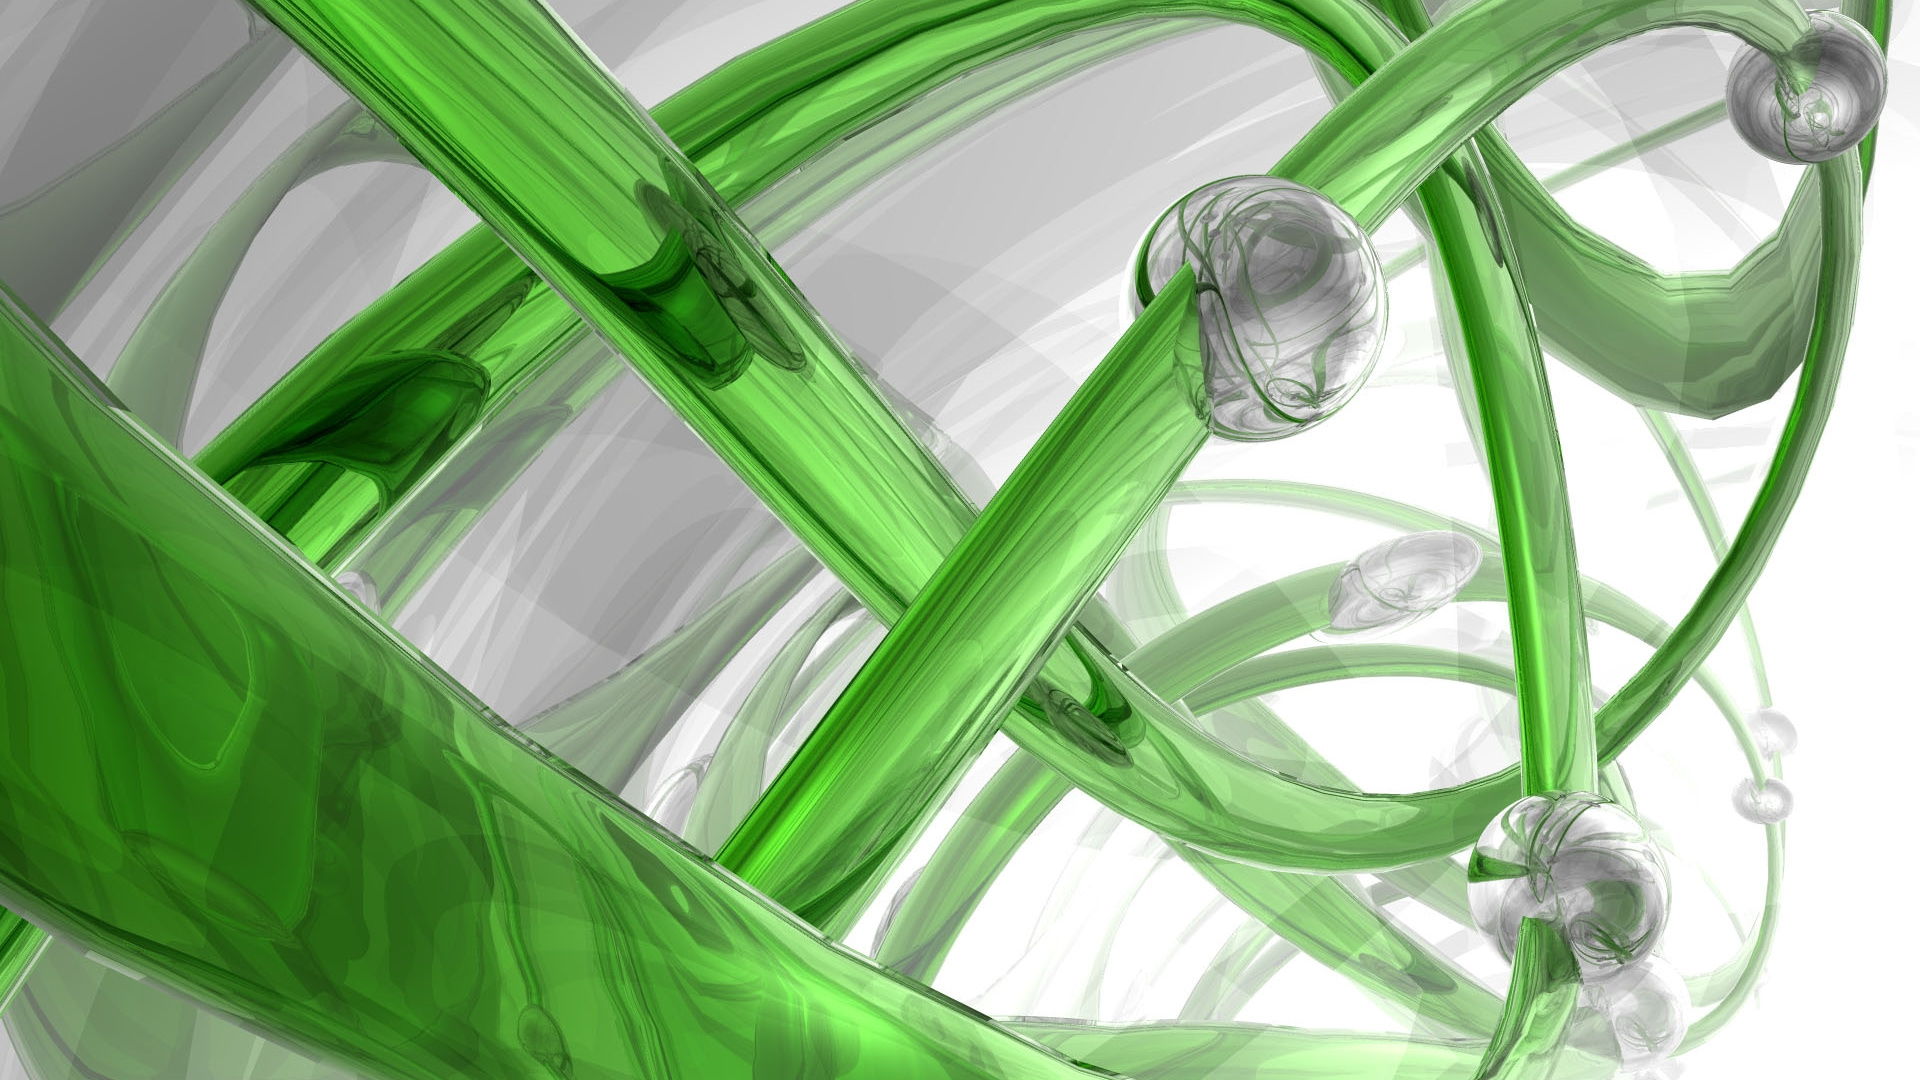 Green and White Abstract Painting. Wallpaper in 1920x1080 Resolution